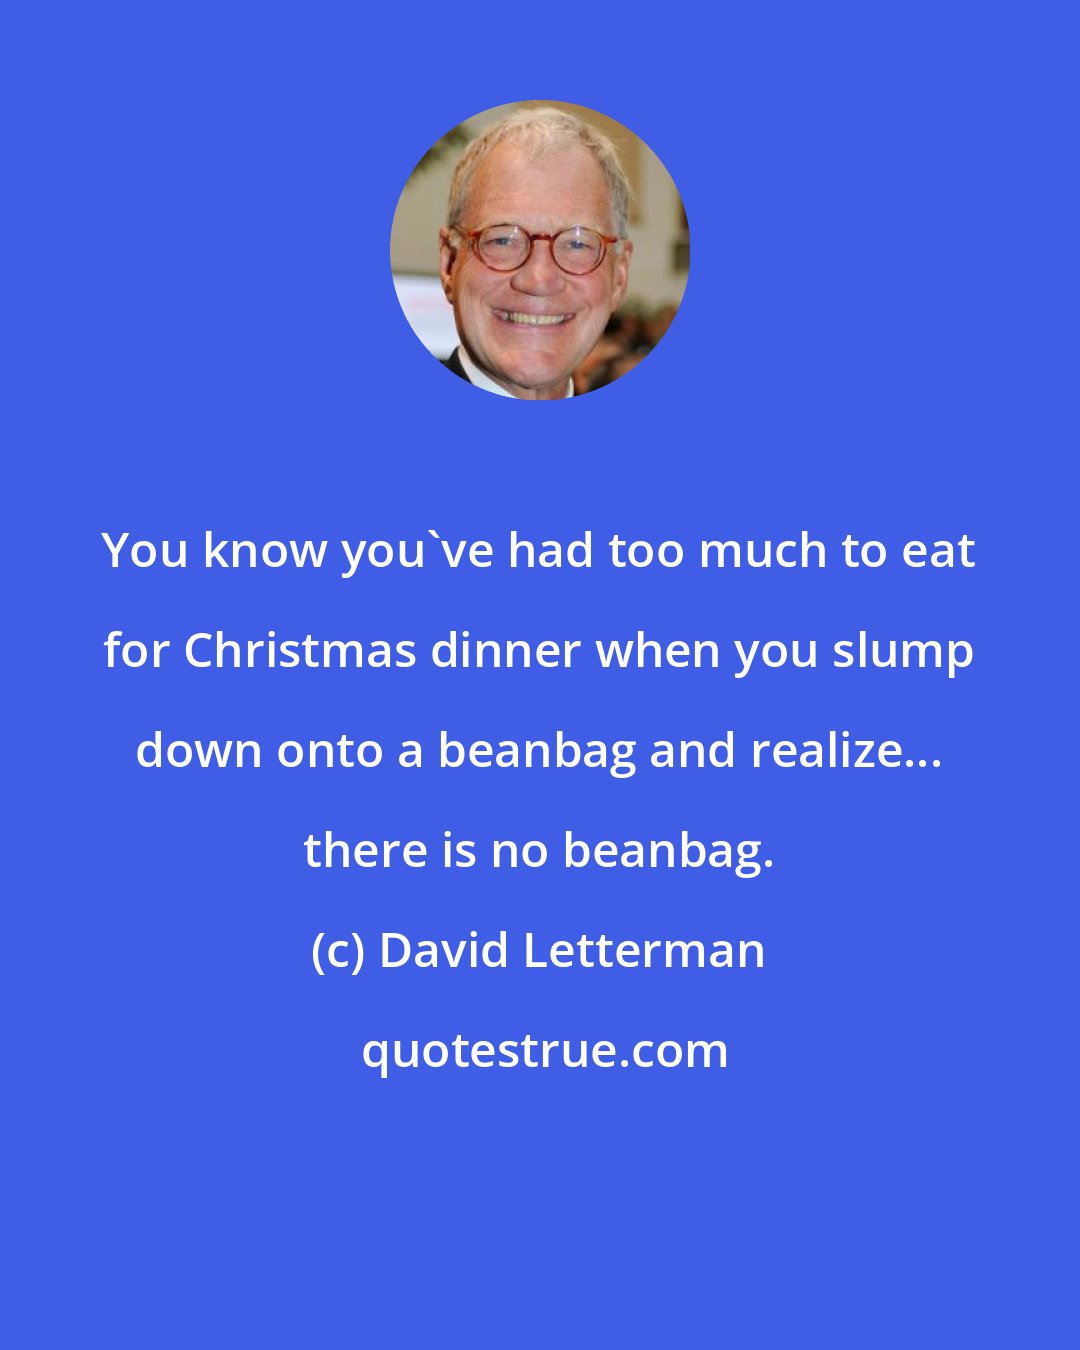 David Letterman: You know you've had too much to eat for Christmas dinner when you slump down onto a beanbag and realize... there is no beanbag.